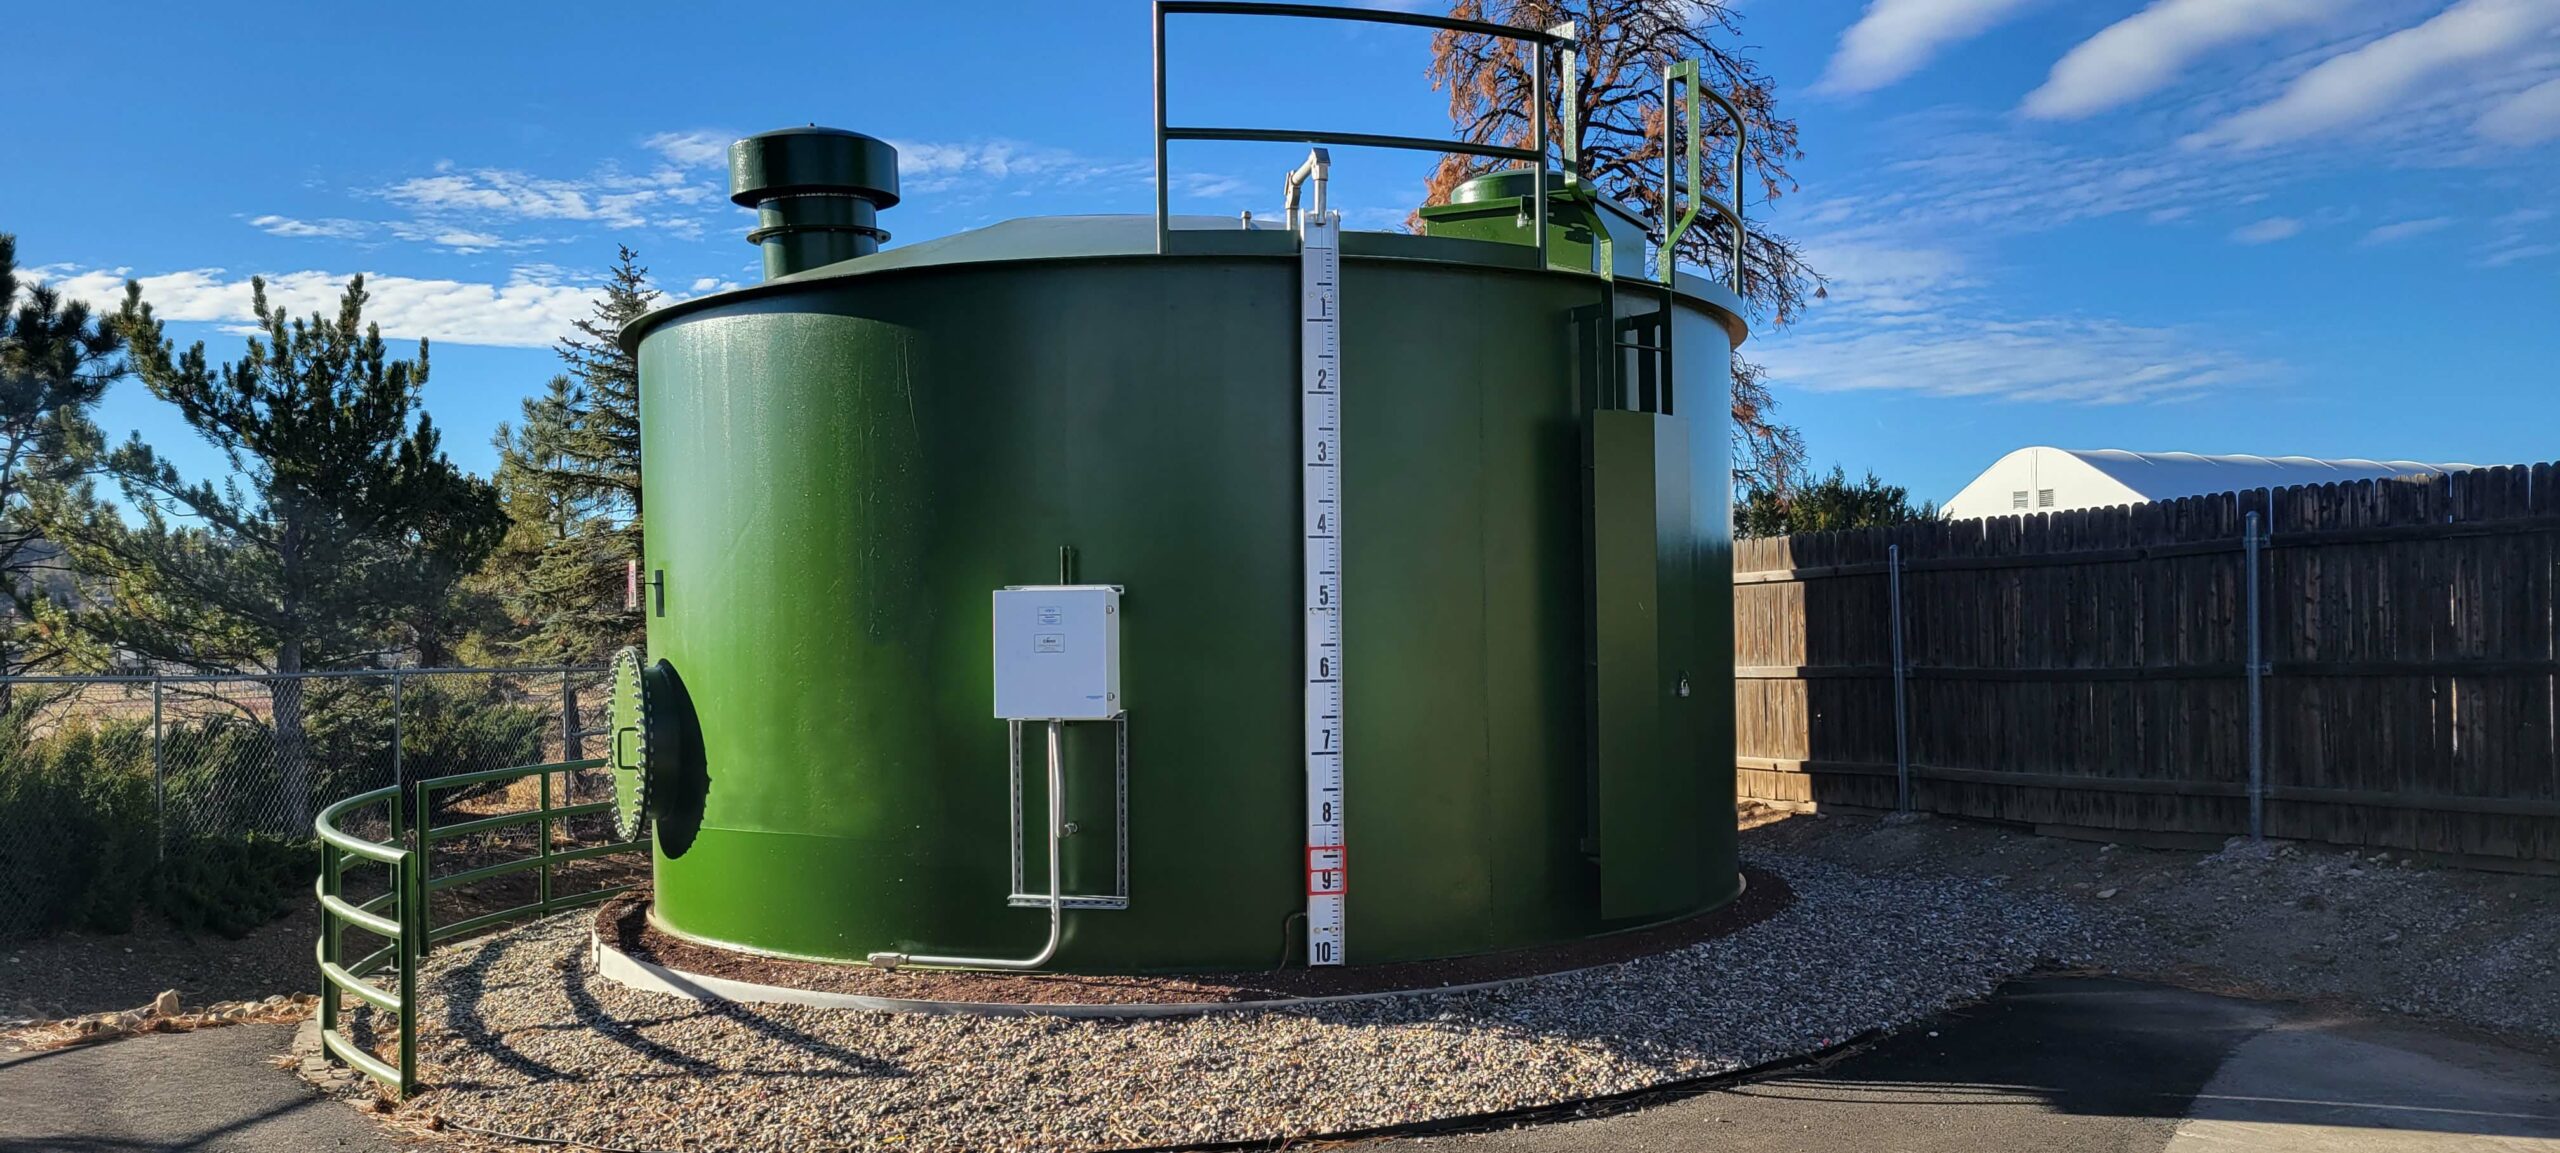 Large green industrial water tank with a level gauge and a smaller attached cylinder, situated in a fenced area with a clear blue sky, maintained by the City of Flagstaff.